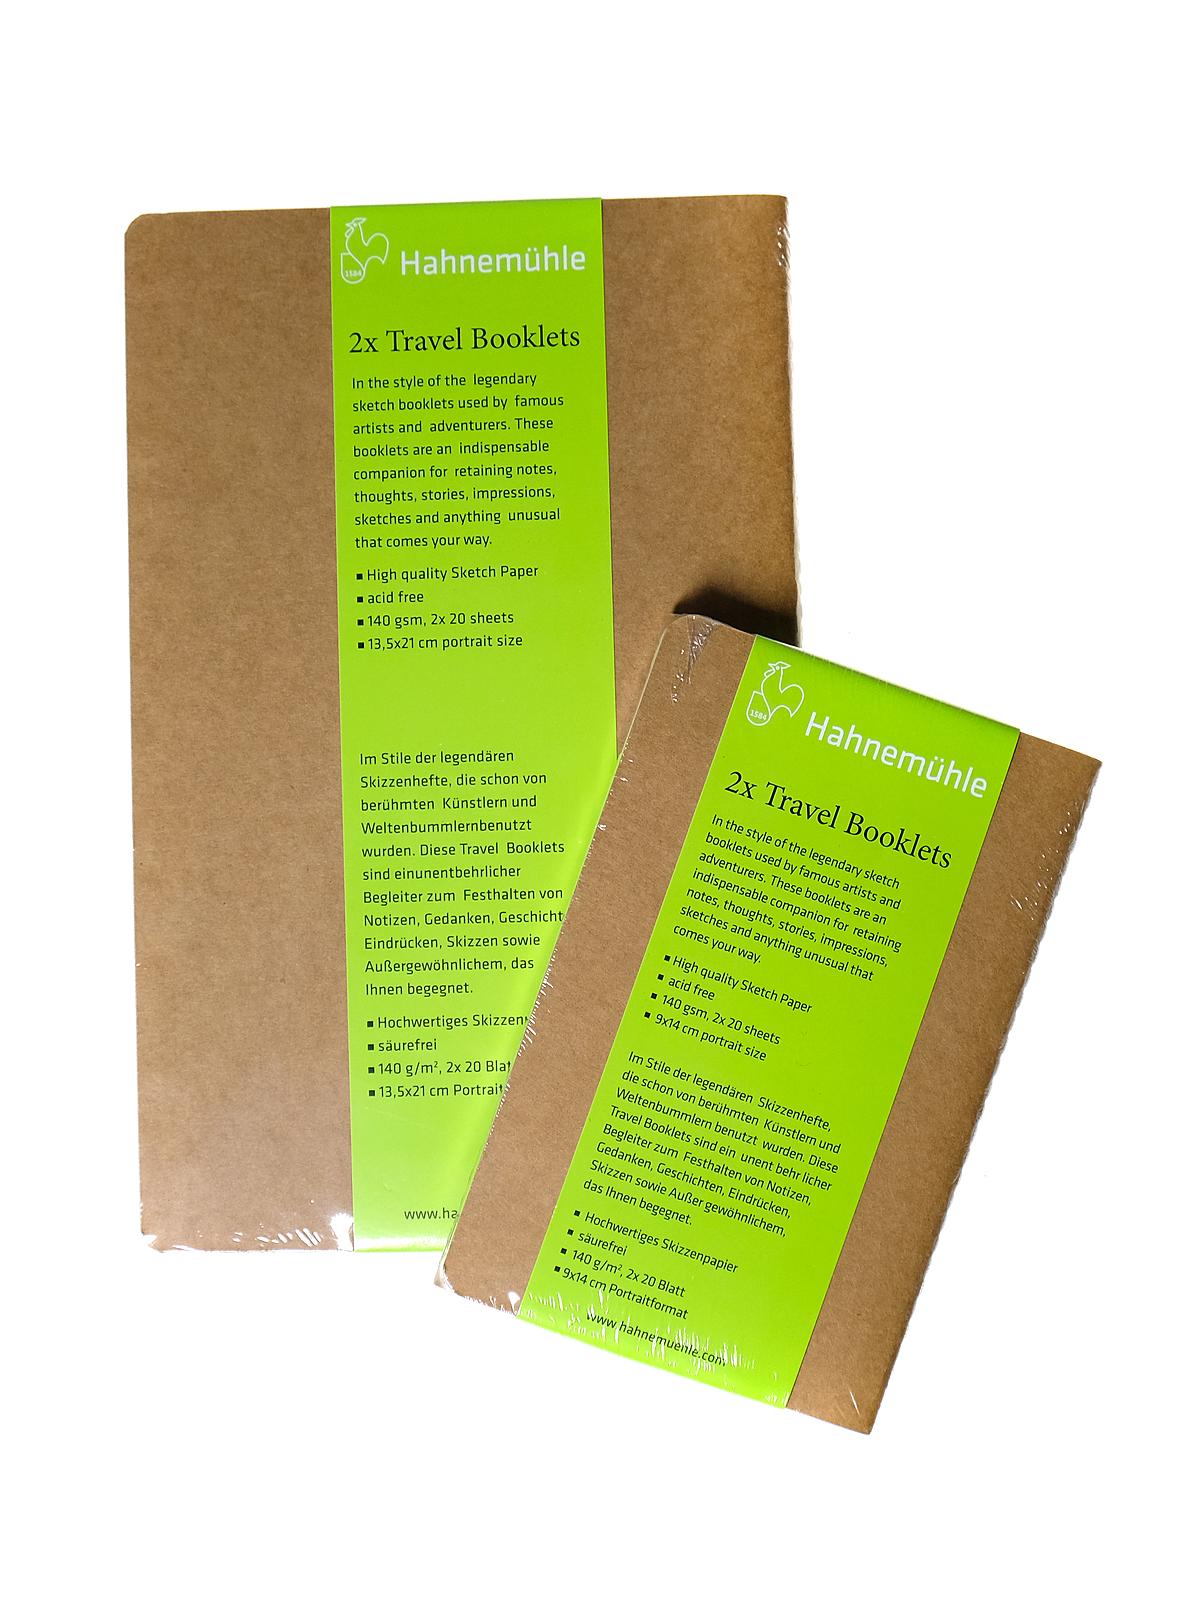 Hahnemuhle - Travel Journals & Booklets